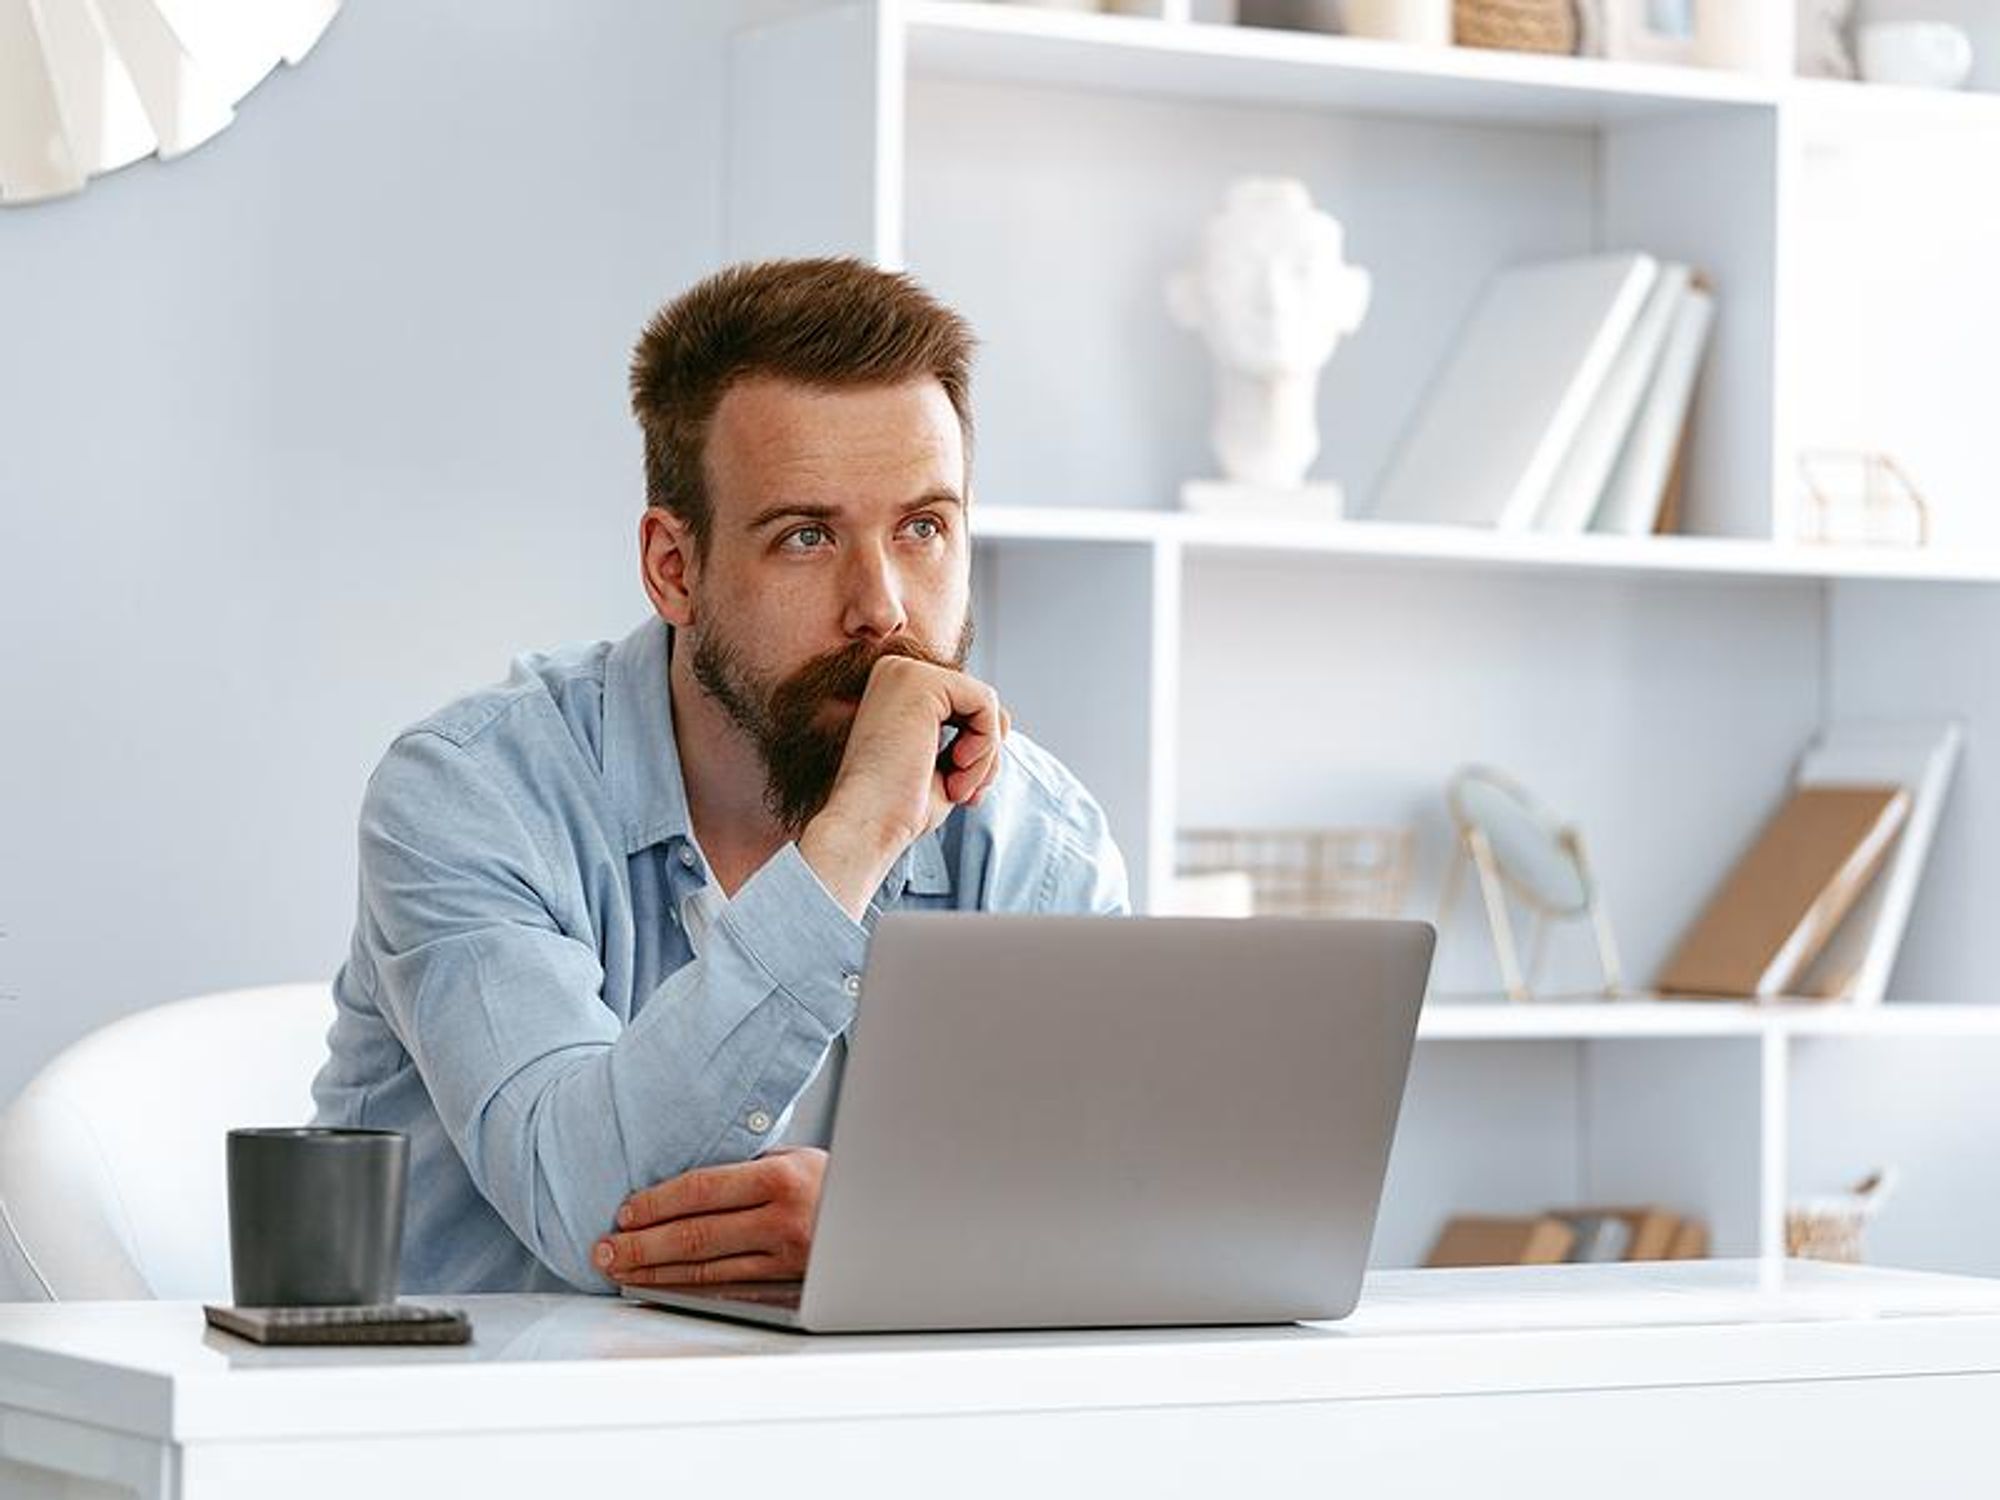 Man thinks about how to write a disruptive cover letter on his laptop